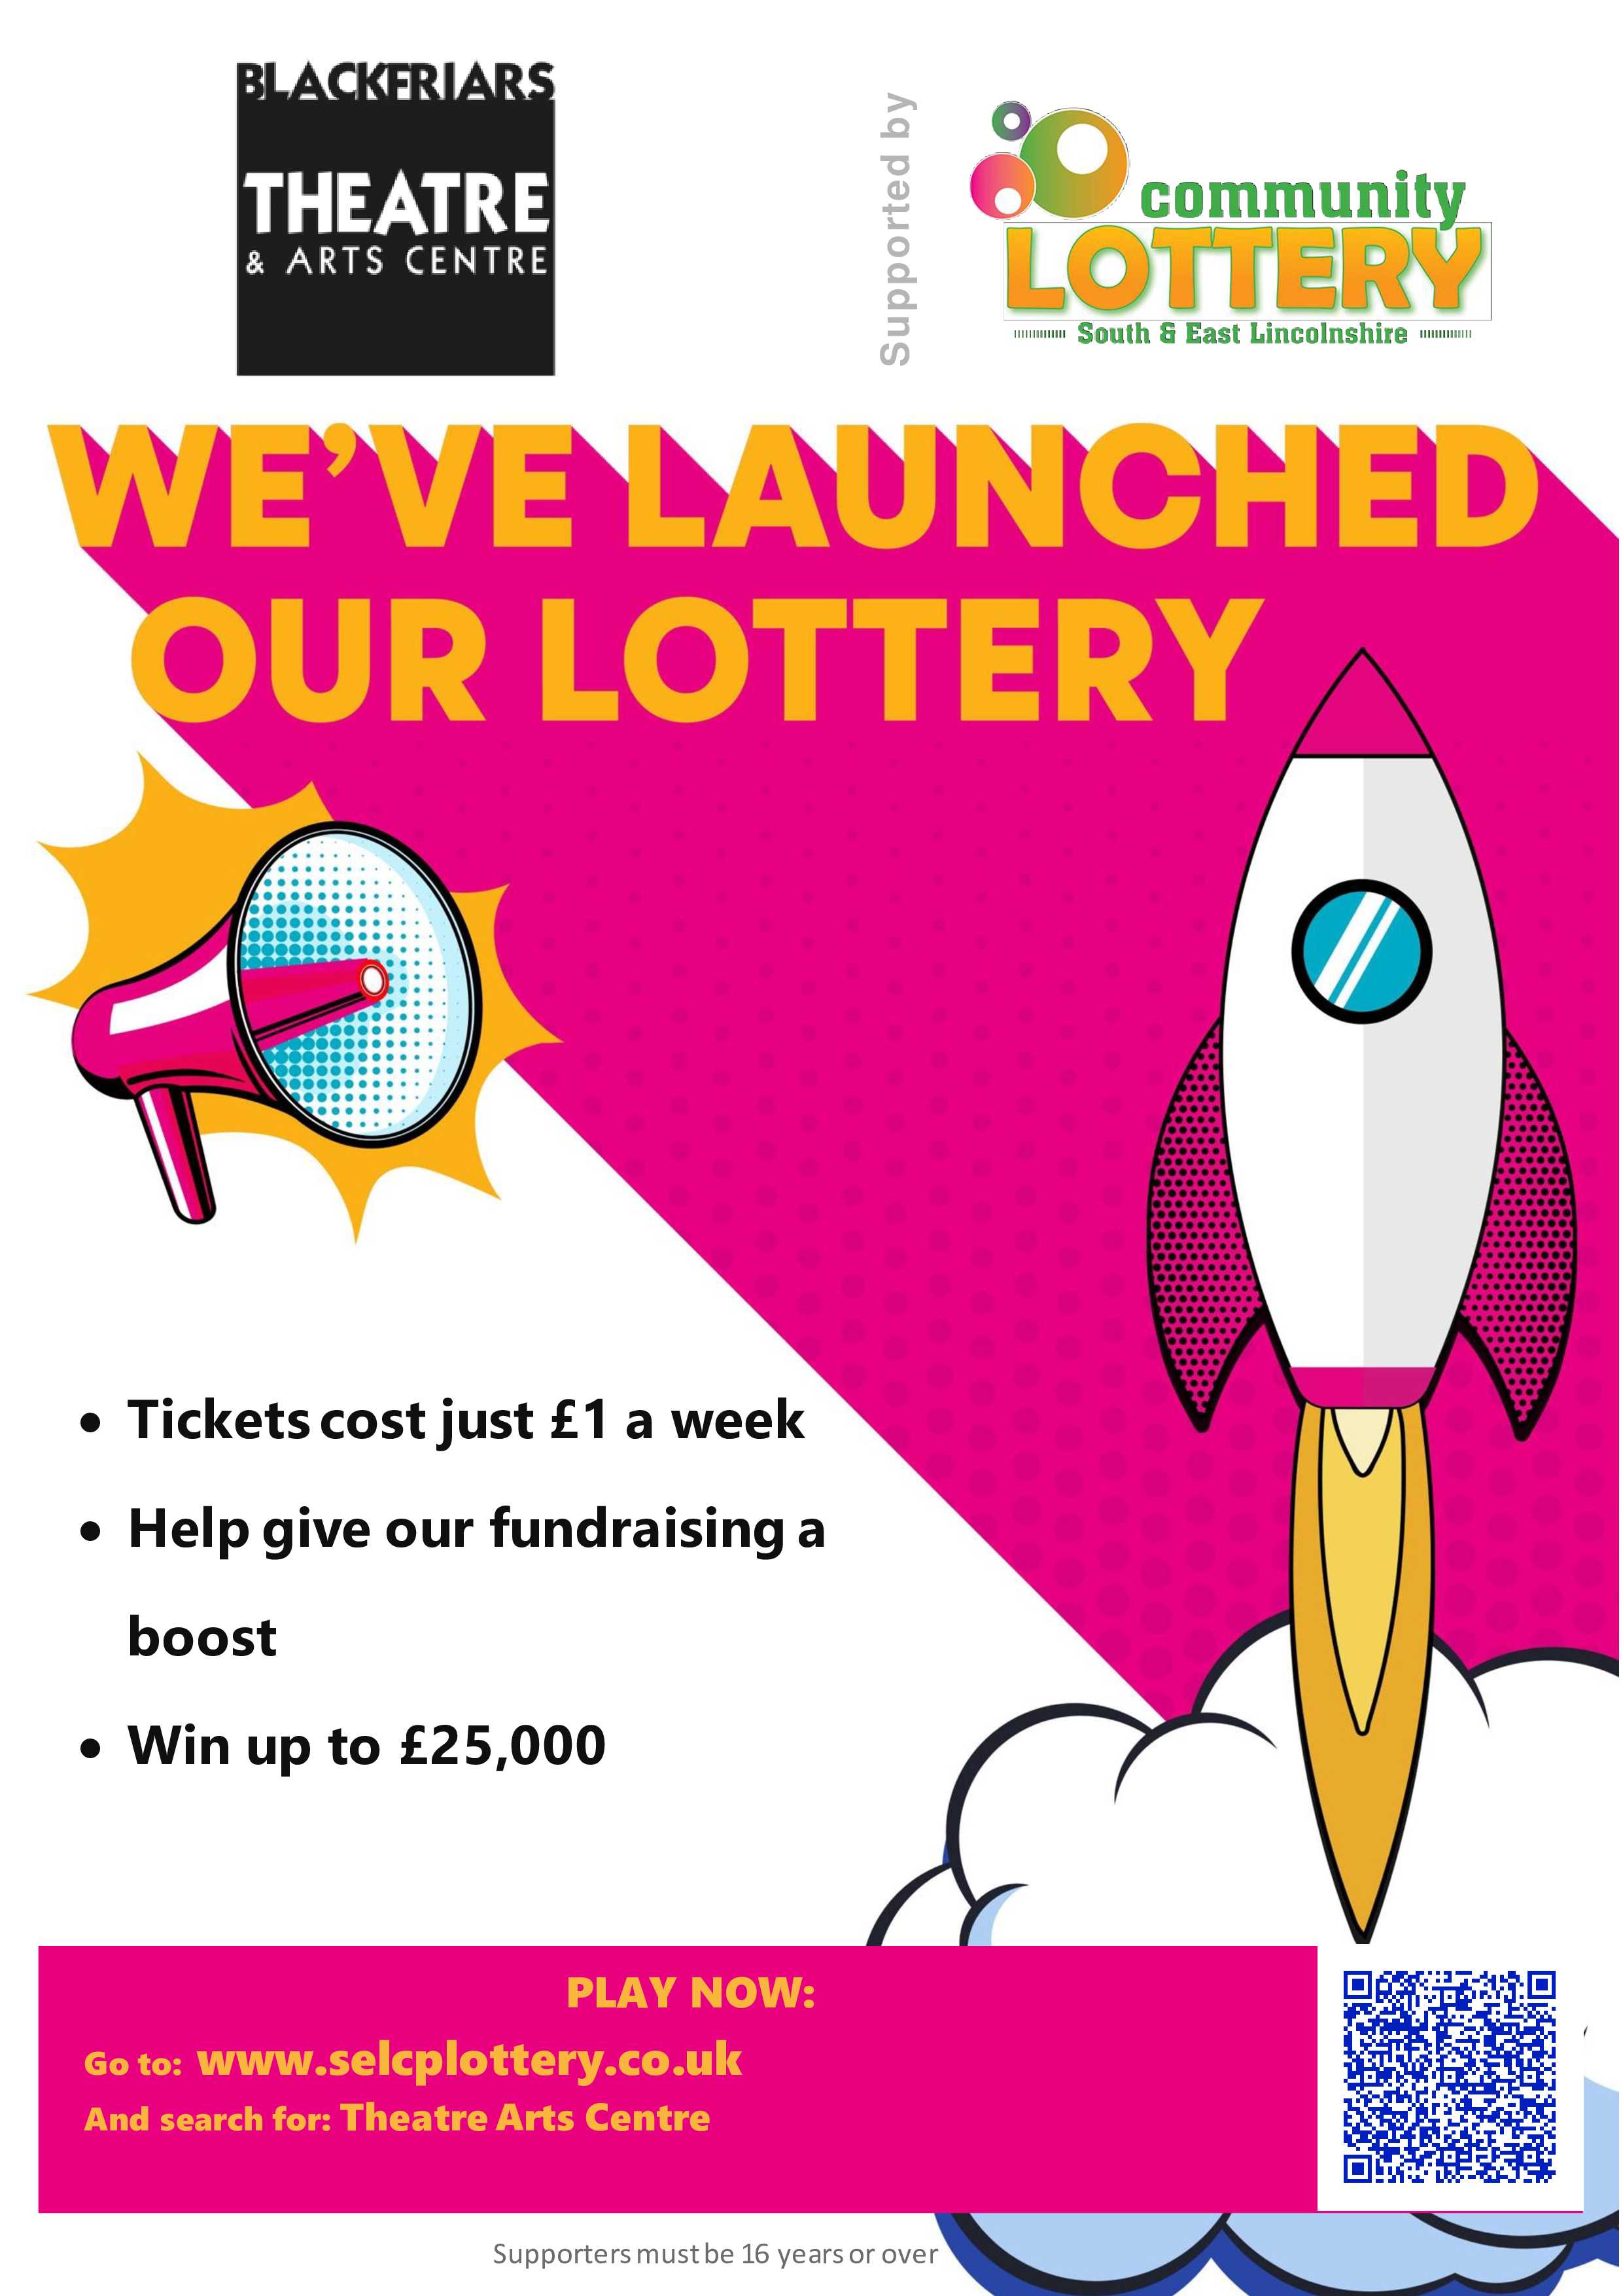 South & East Lincolnshire Community Lottery